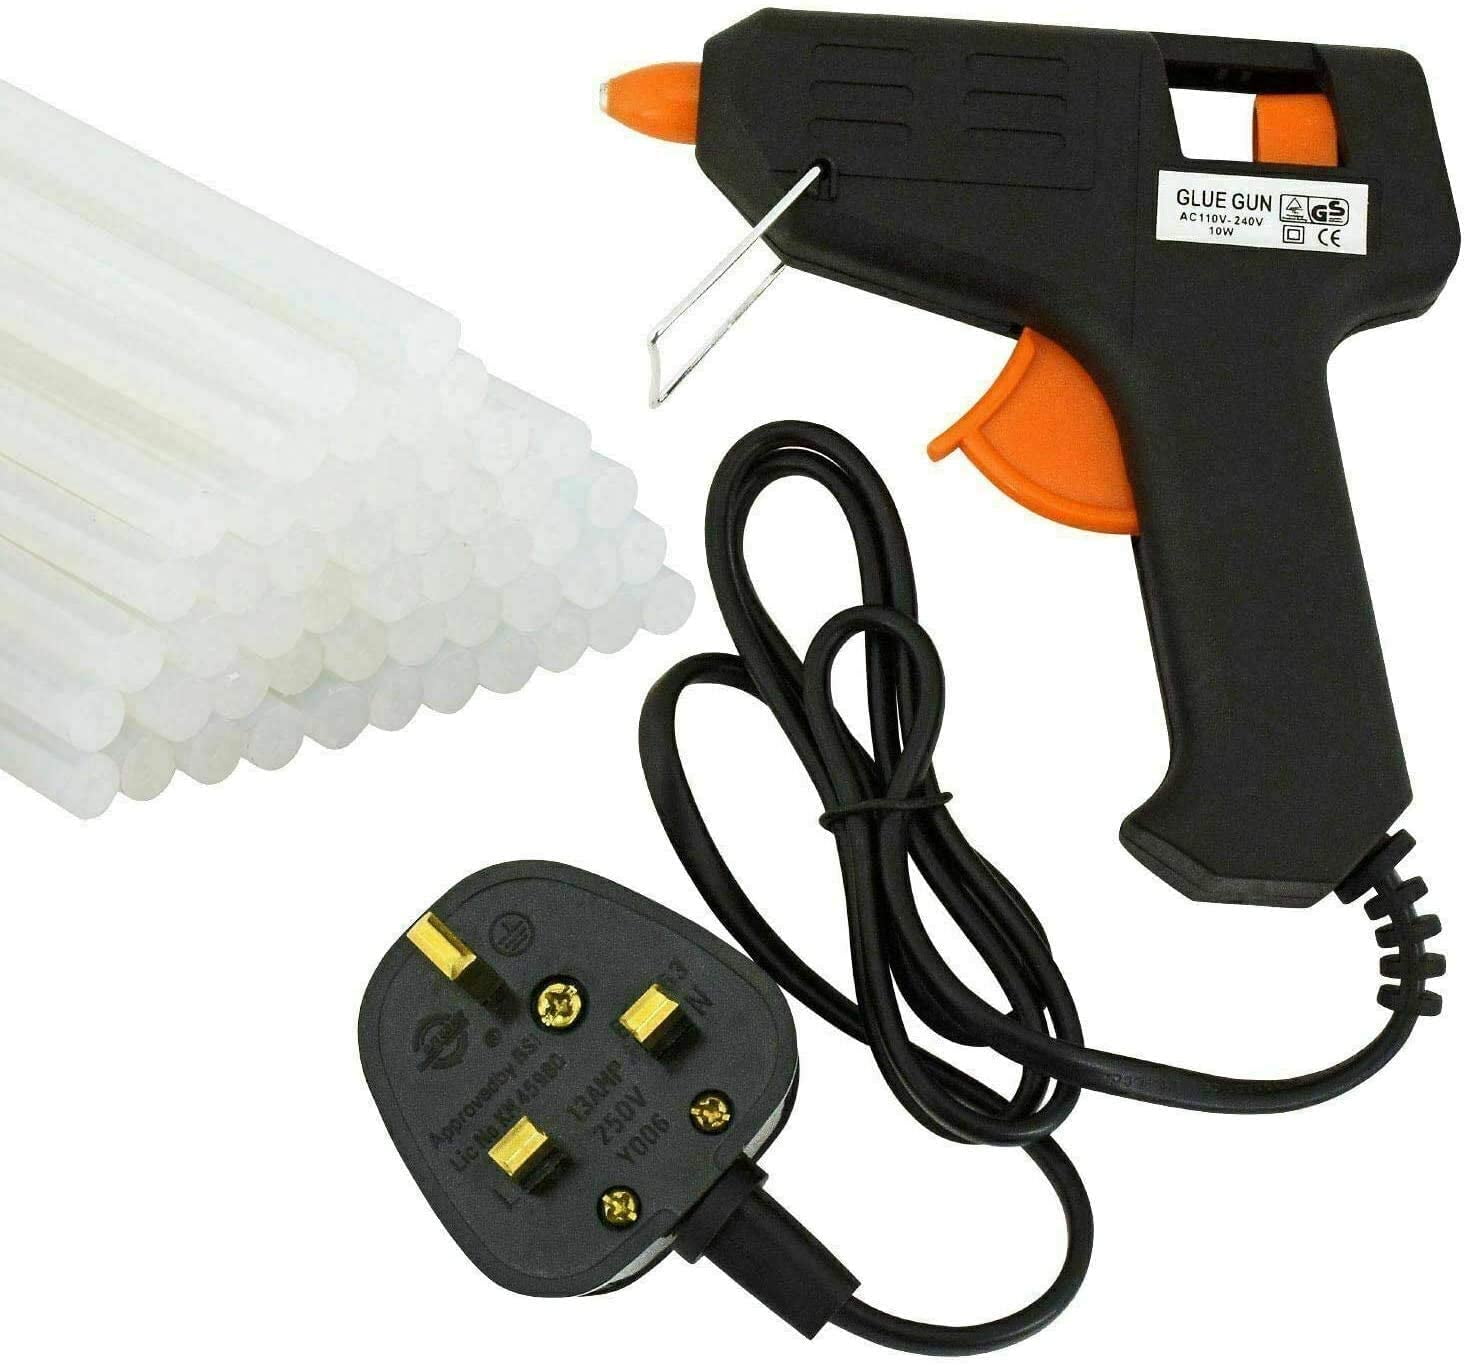 Trigger Electric Hot Melt Glue Gun With 25 Adhesive Sticks For Hobby Craft Mini 